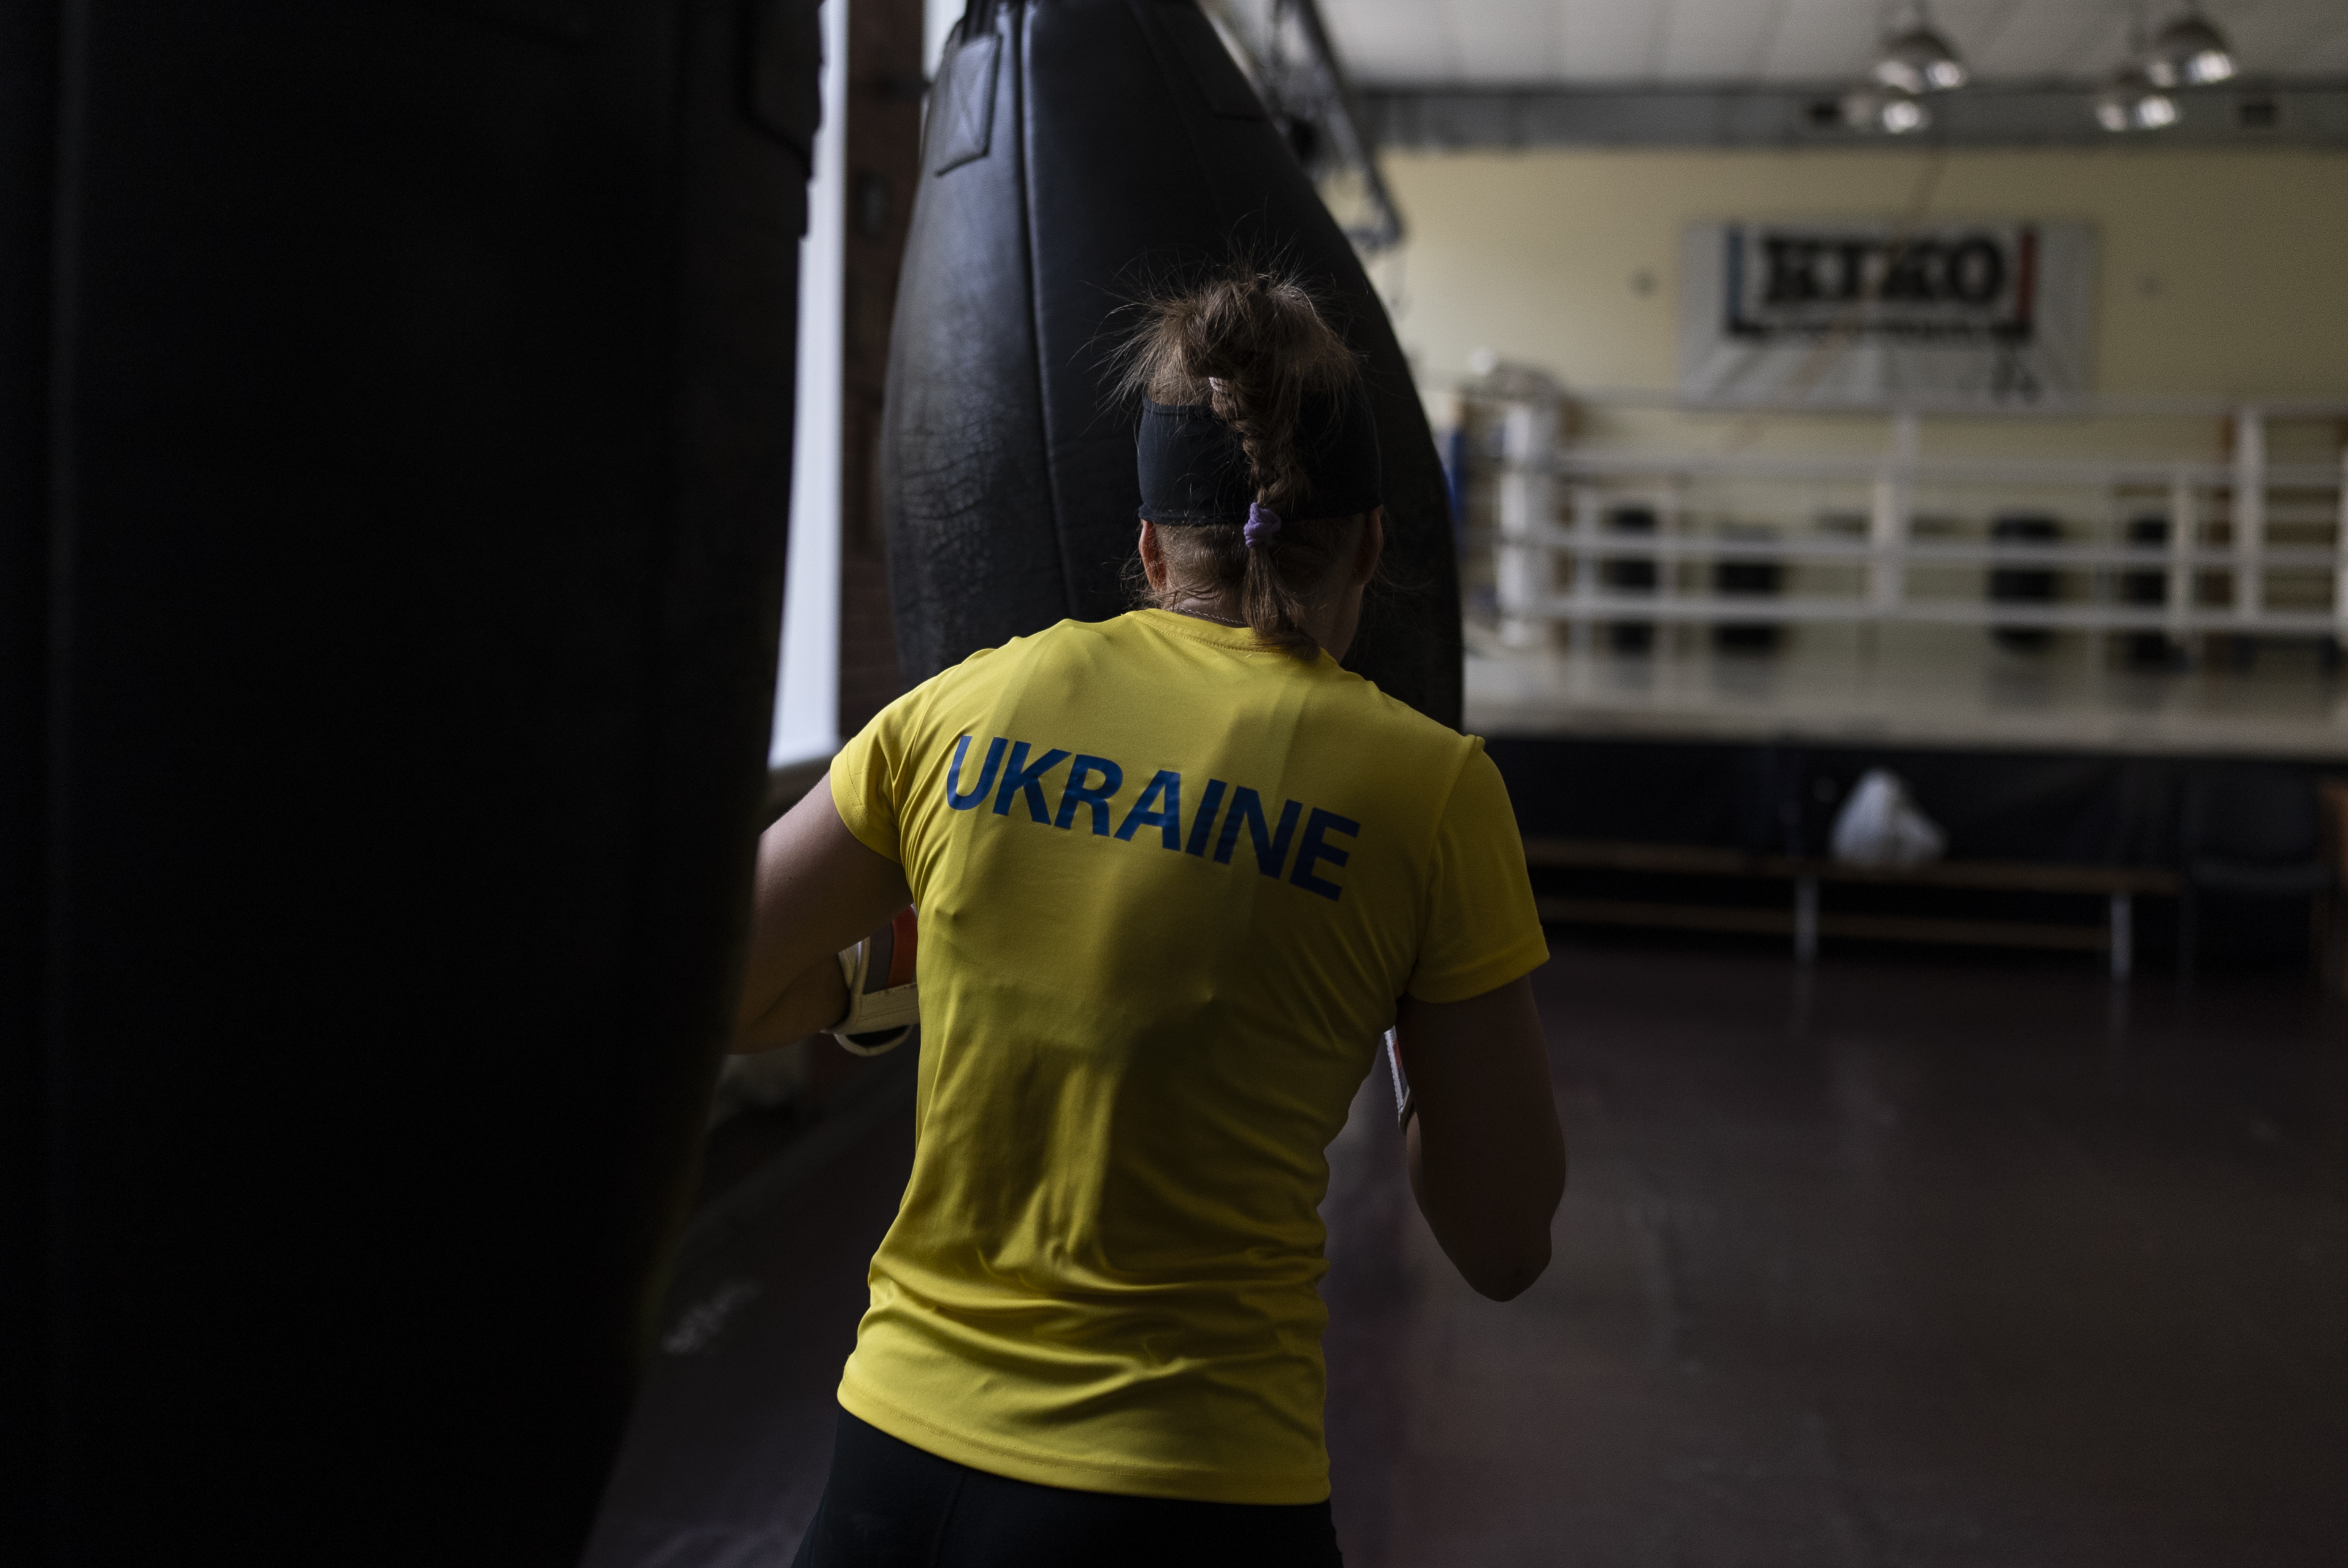 Ukrainian boxer Anna Lysenko hits a punching bag, during her training at Kiko Boxing Club in Kyiv, Ukraine, Thursday, July 6, 2023. Lysenko dedicates long hours preparing for next year's Paris Olympics despite the unsettling sounds of explosions booming outside. (AP Photo/Jae C. Hong)